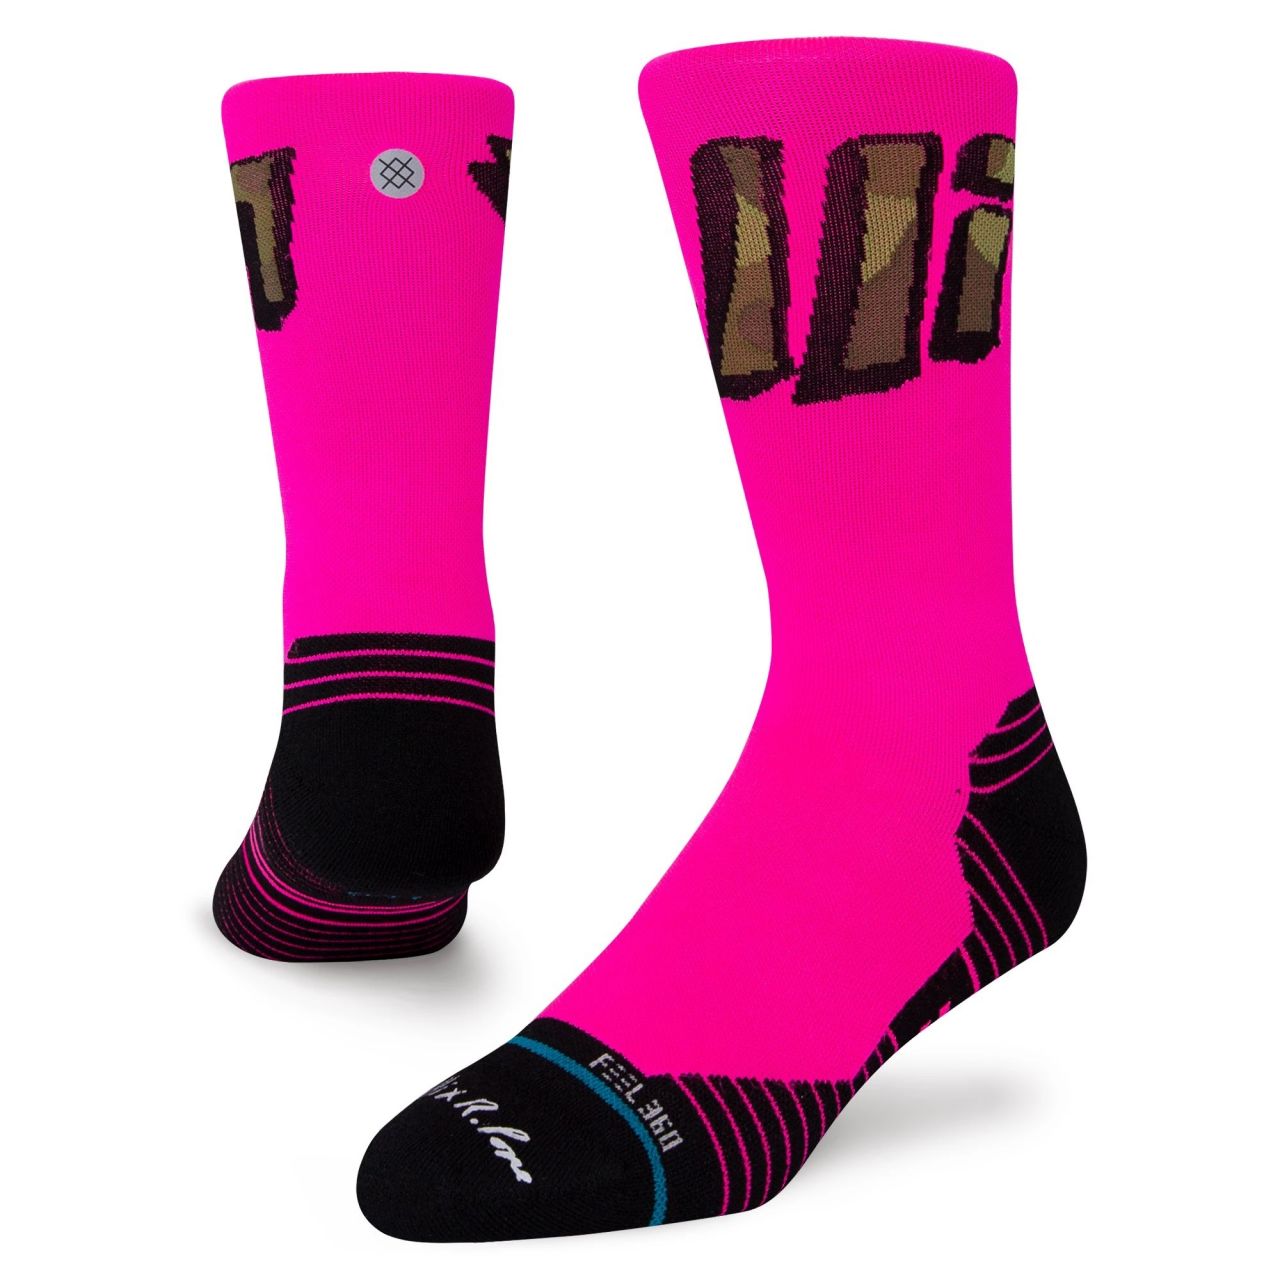 STANCE CHAUSSETTES CINELLI RP PERF ROSE Chaussettes de running